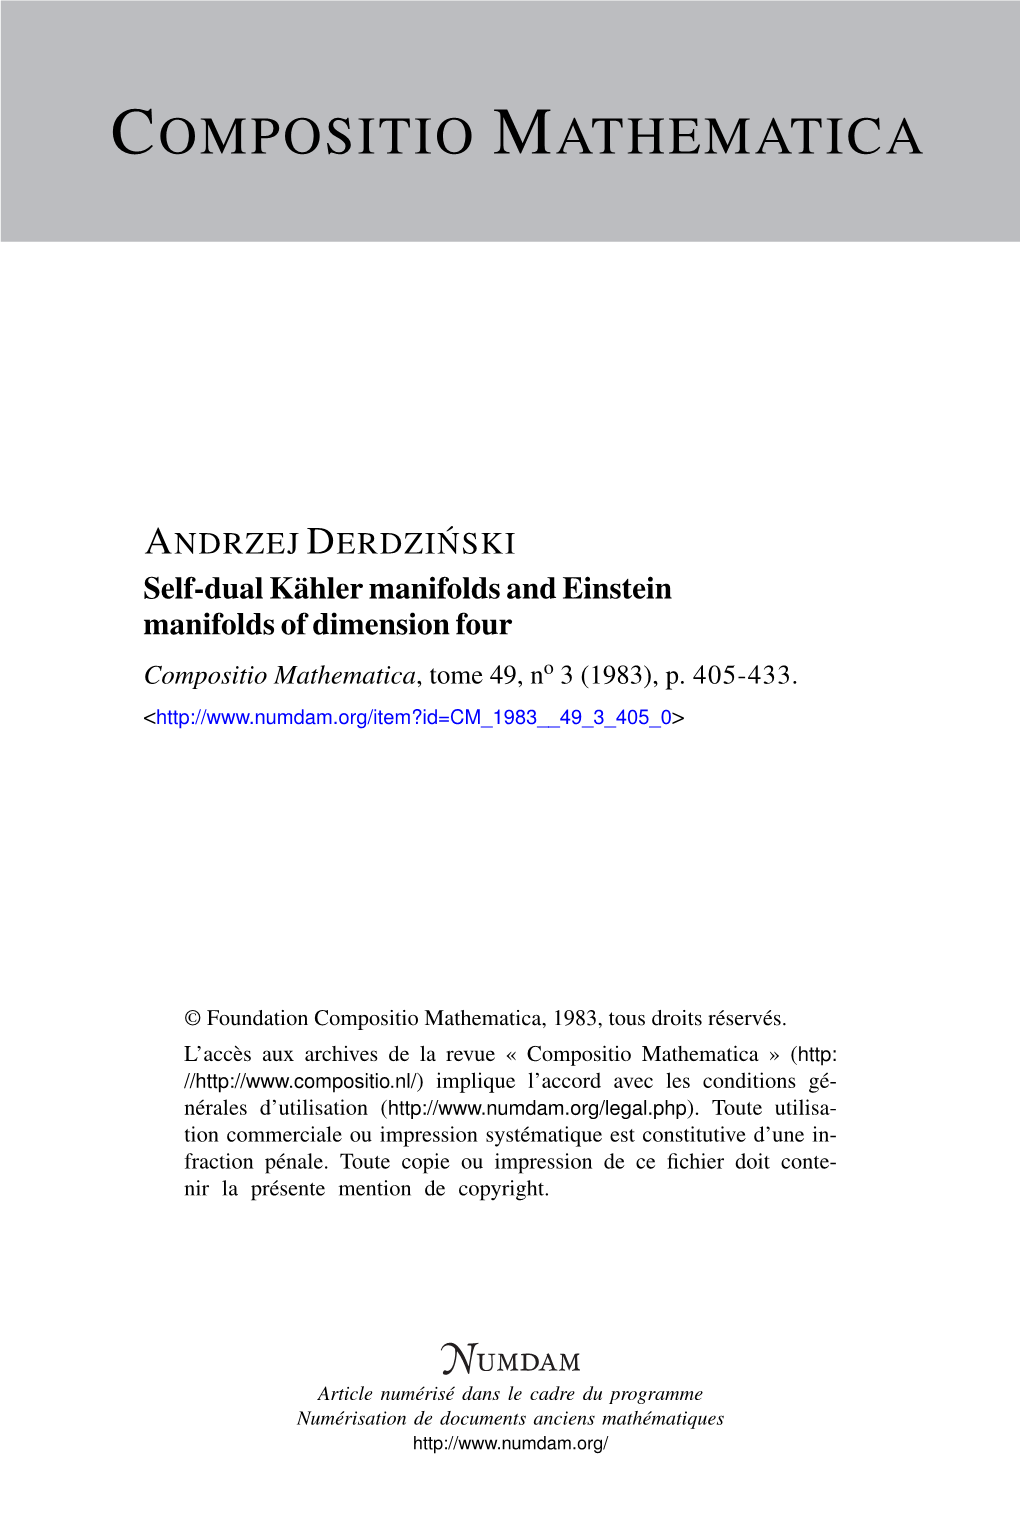 Self-Dual Kähler Manifolds and Einstein Manifolds of Dimension Four Compositio Mathematica, Tome 49, No 3 (1983), P